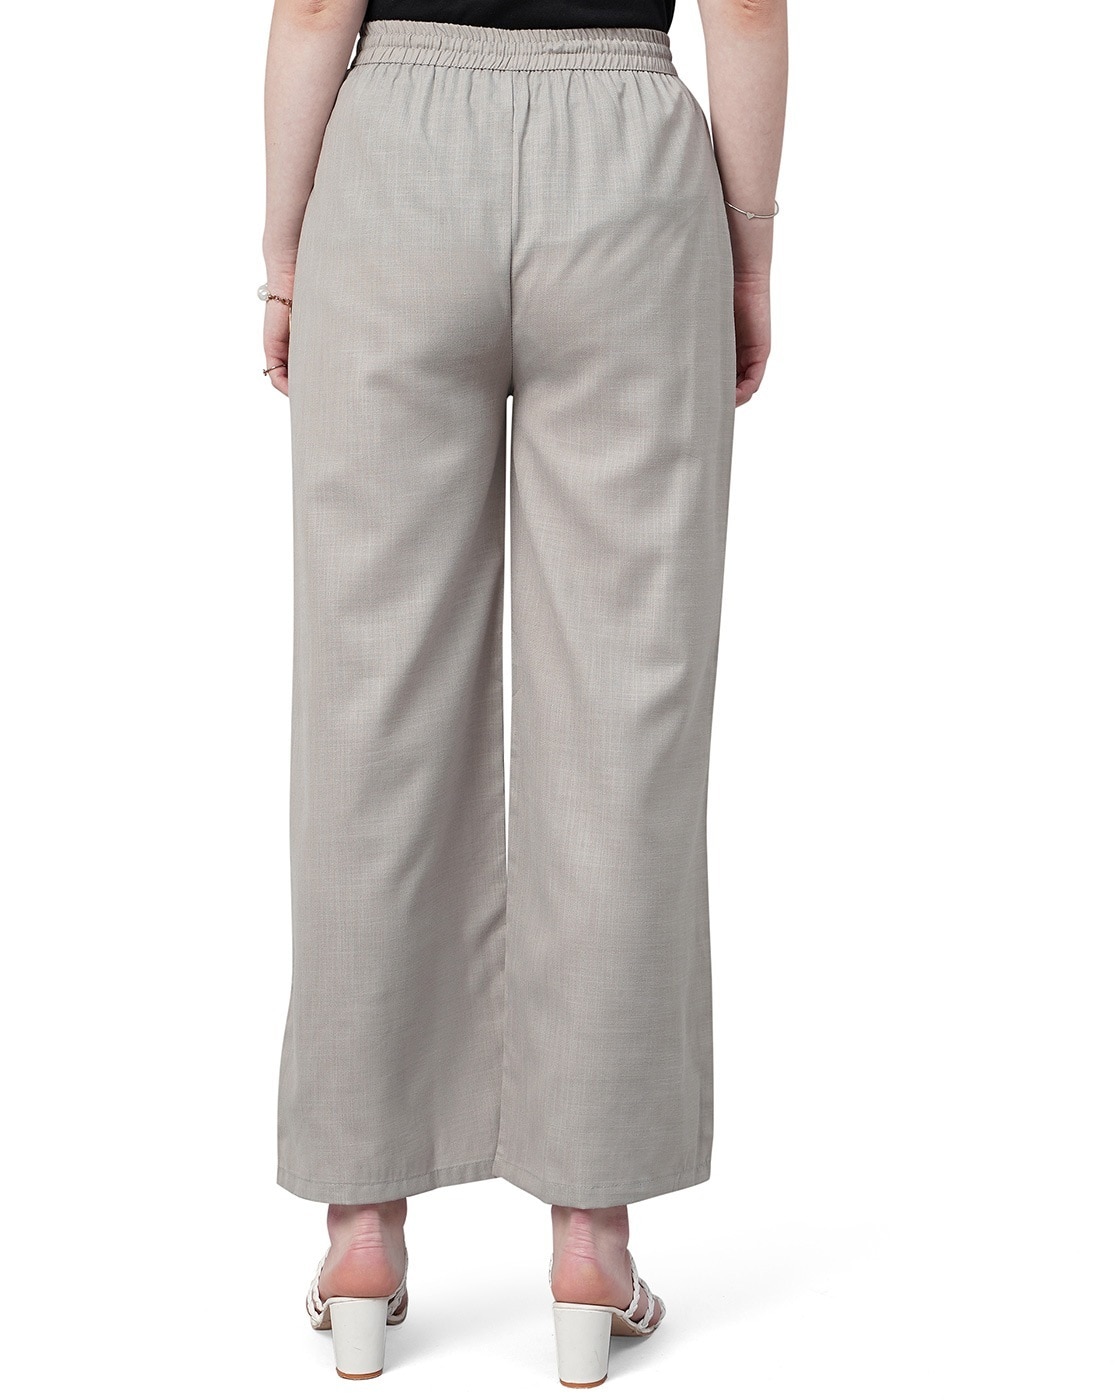 Buy Beige Trousers & Pants for Women by FITHUB Online